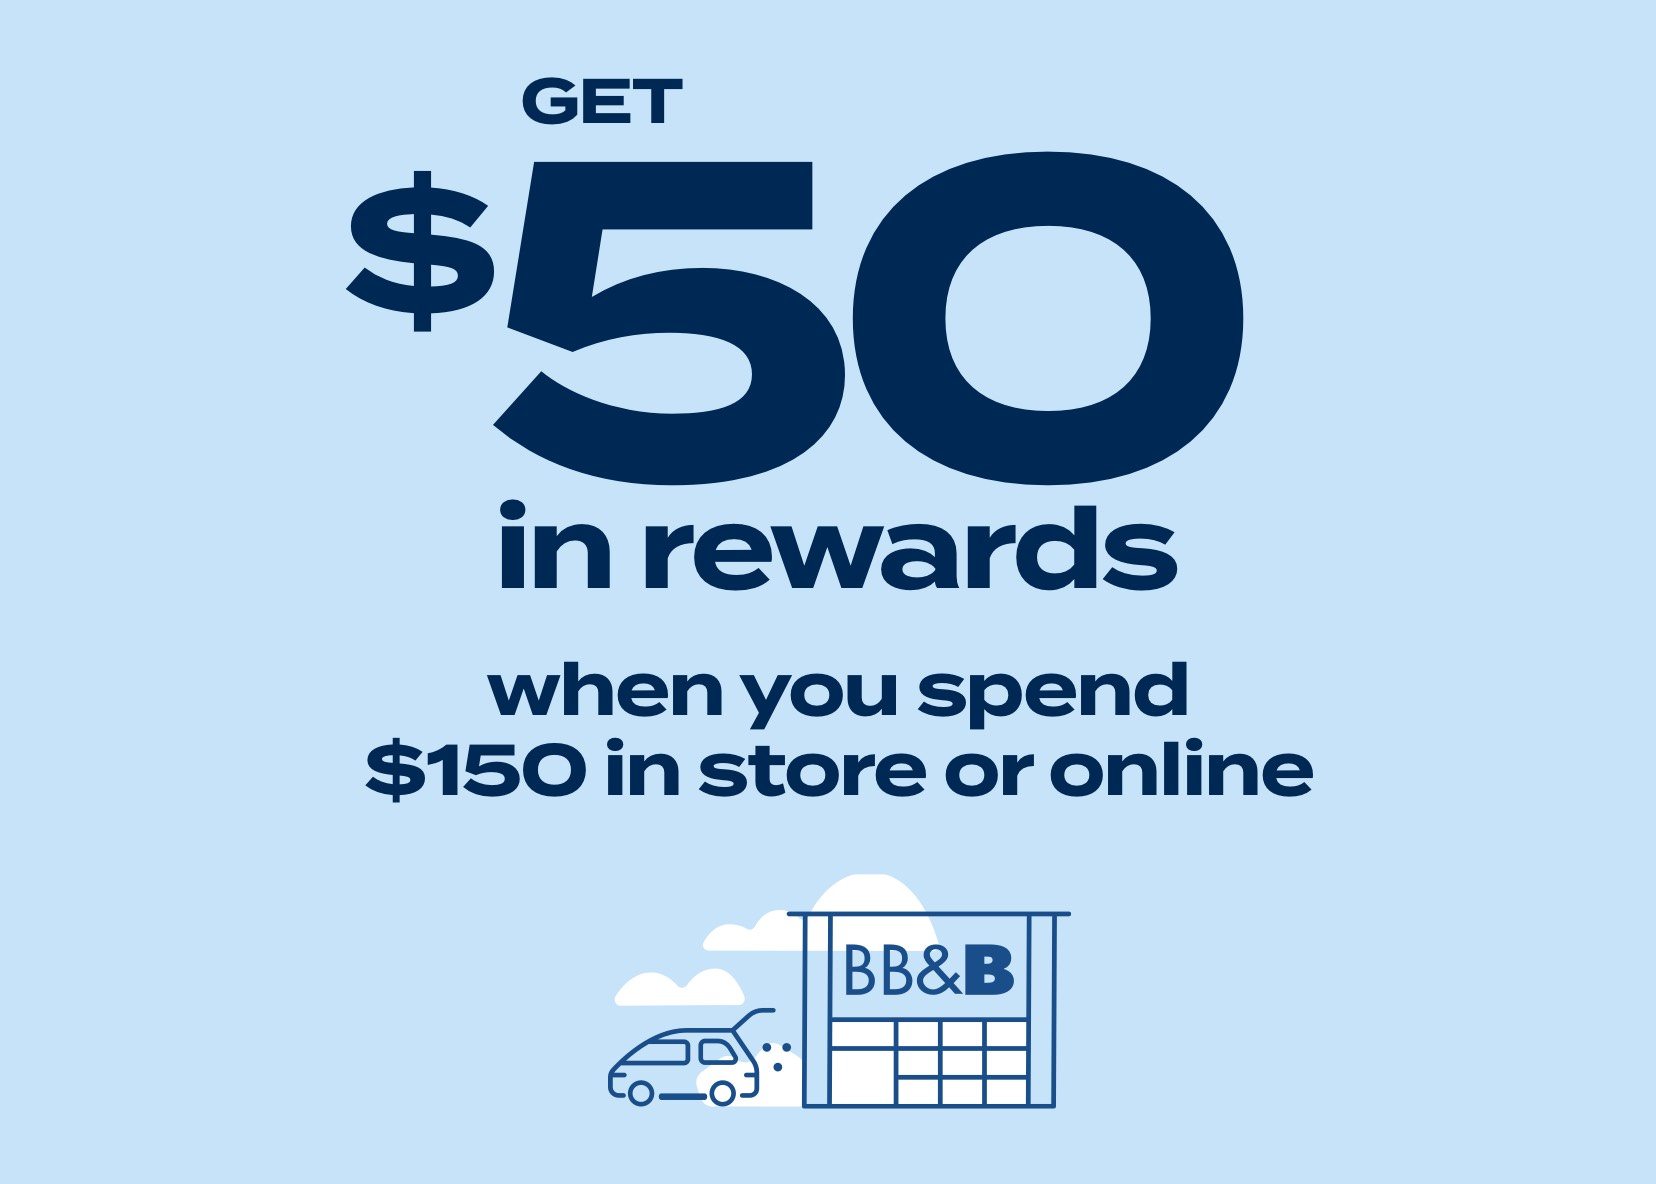 Get $50 in rewards when you spend $150 in store or online